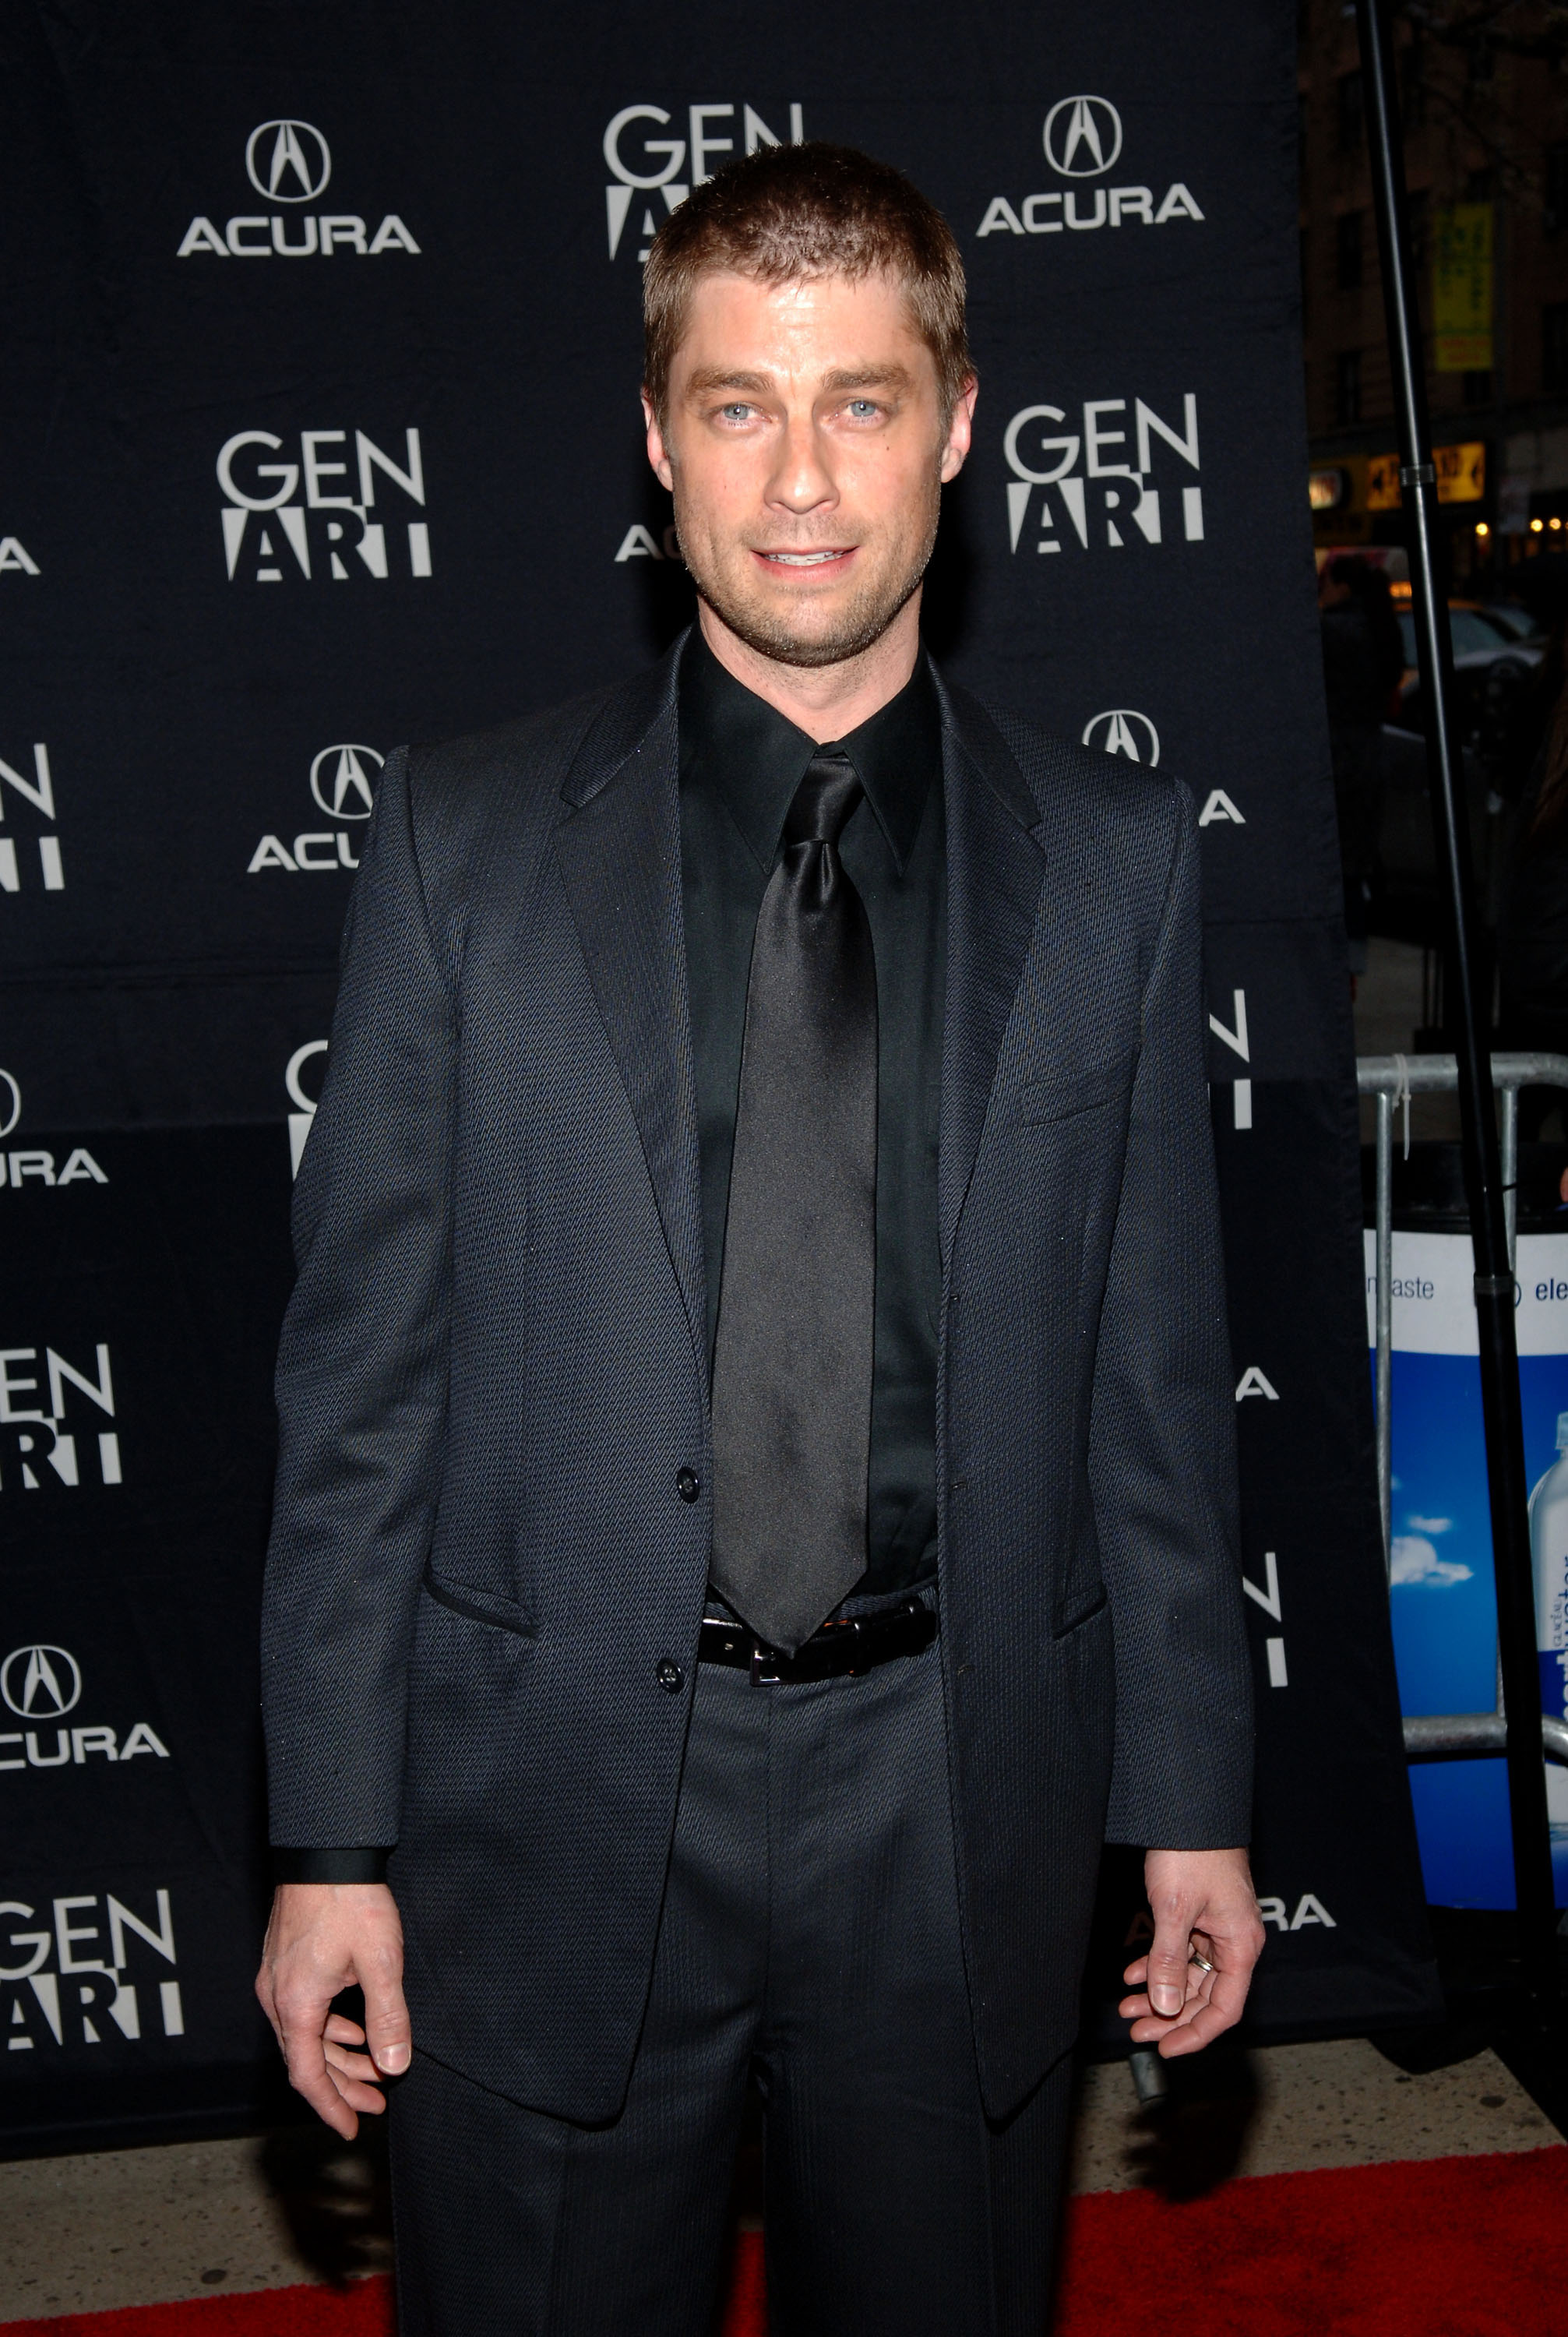 'The Young and the Restless' actor Jamison Jones wearing a black suit and posing on the red carpet.